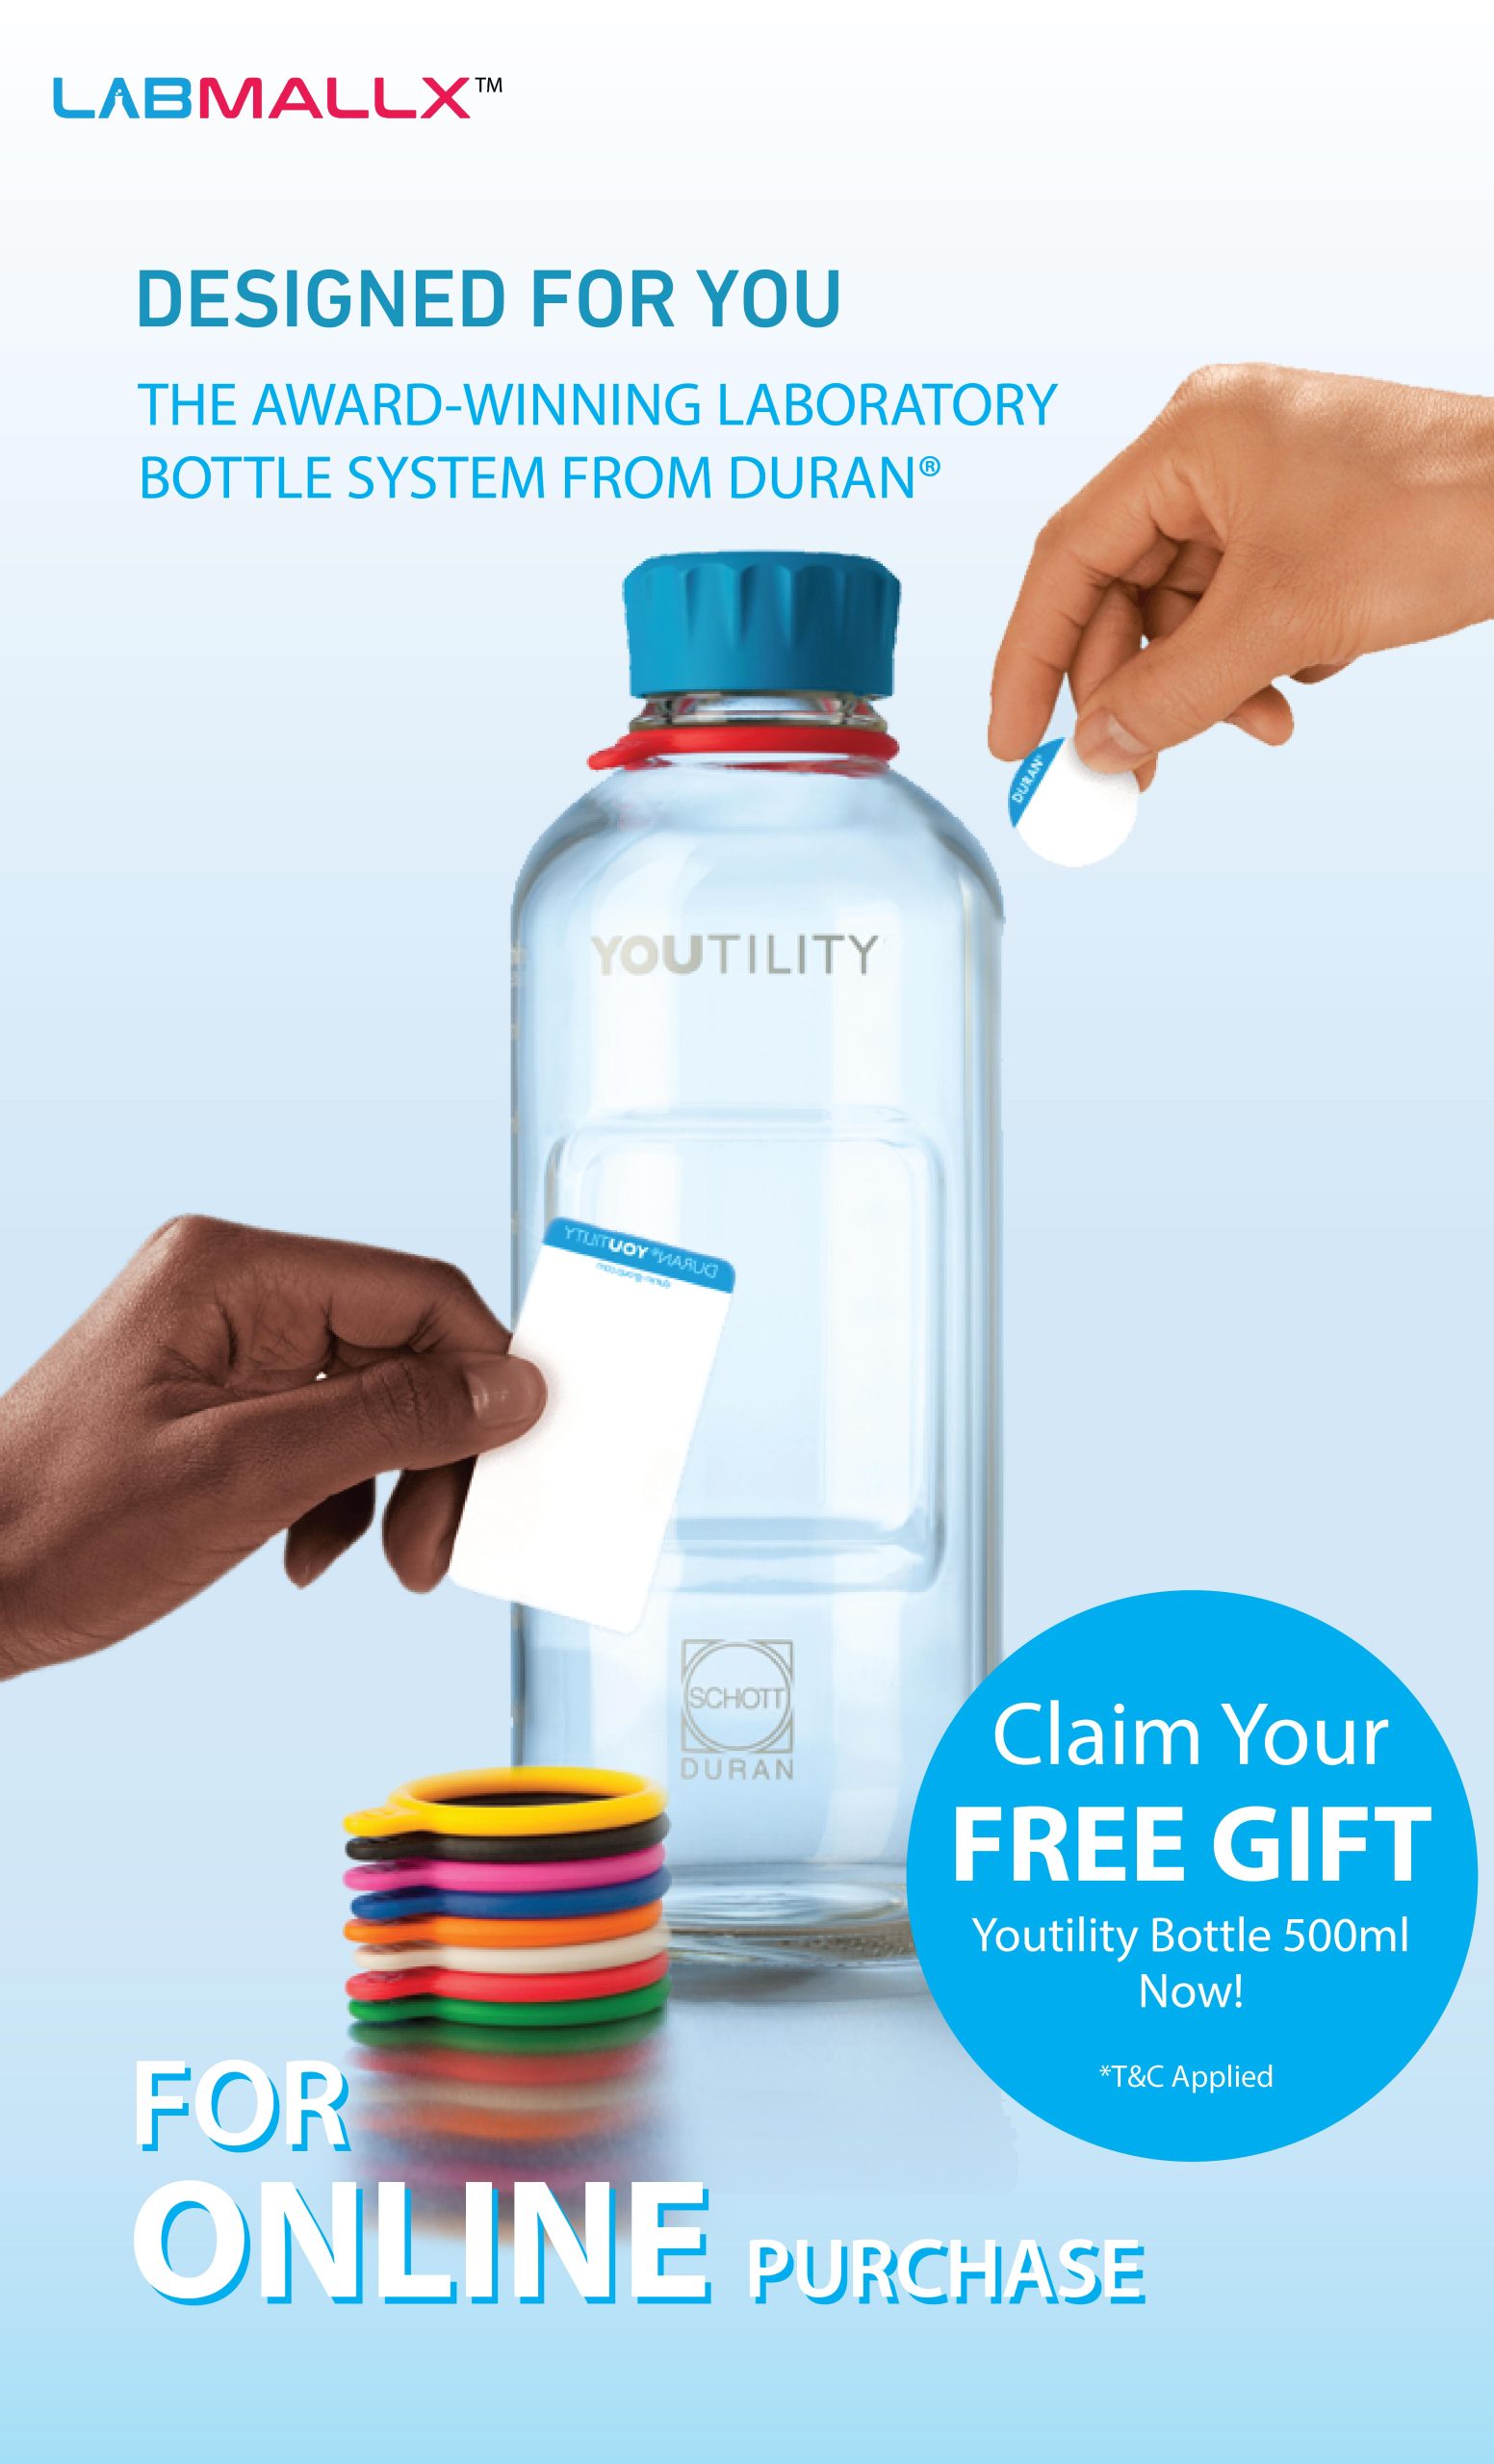 Claim Your Free Gift Duran Youtility Bottle! Limited Time Only!